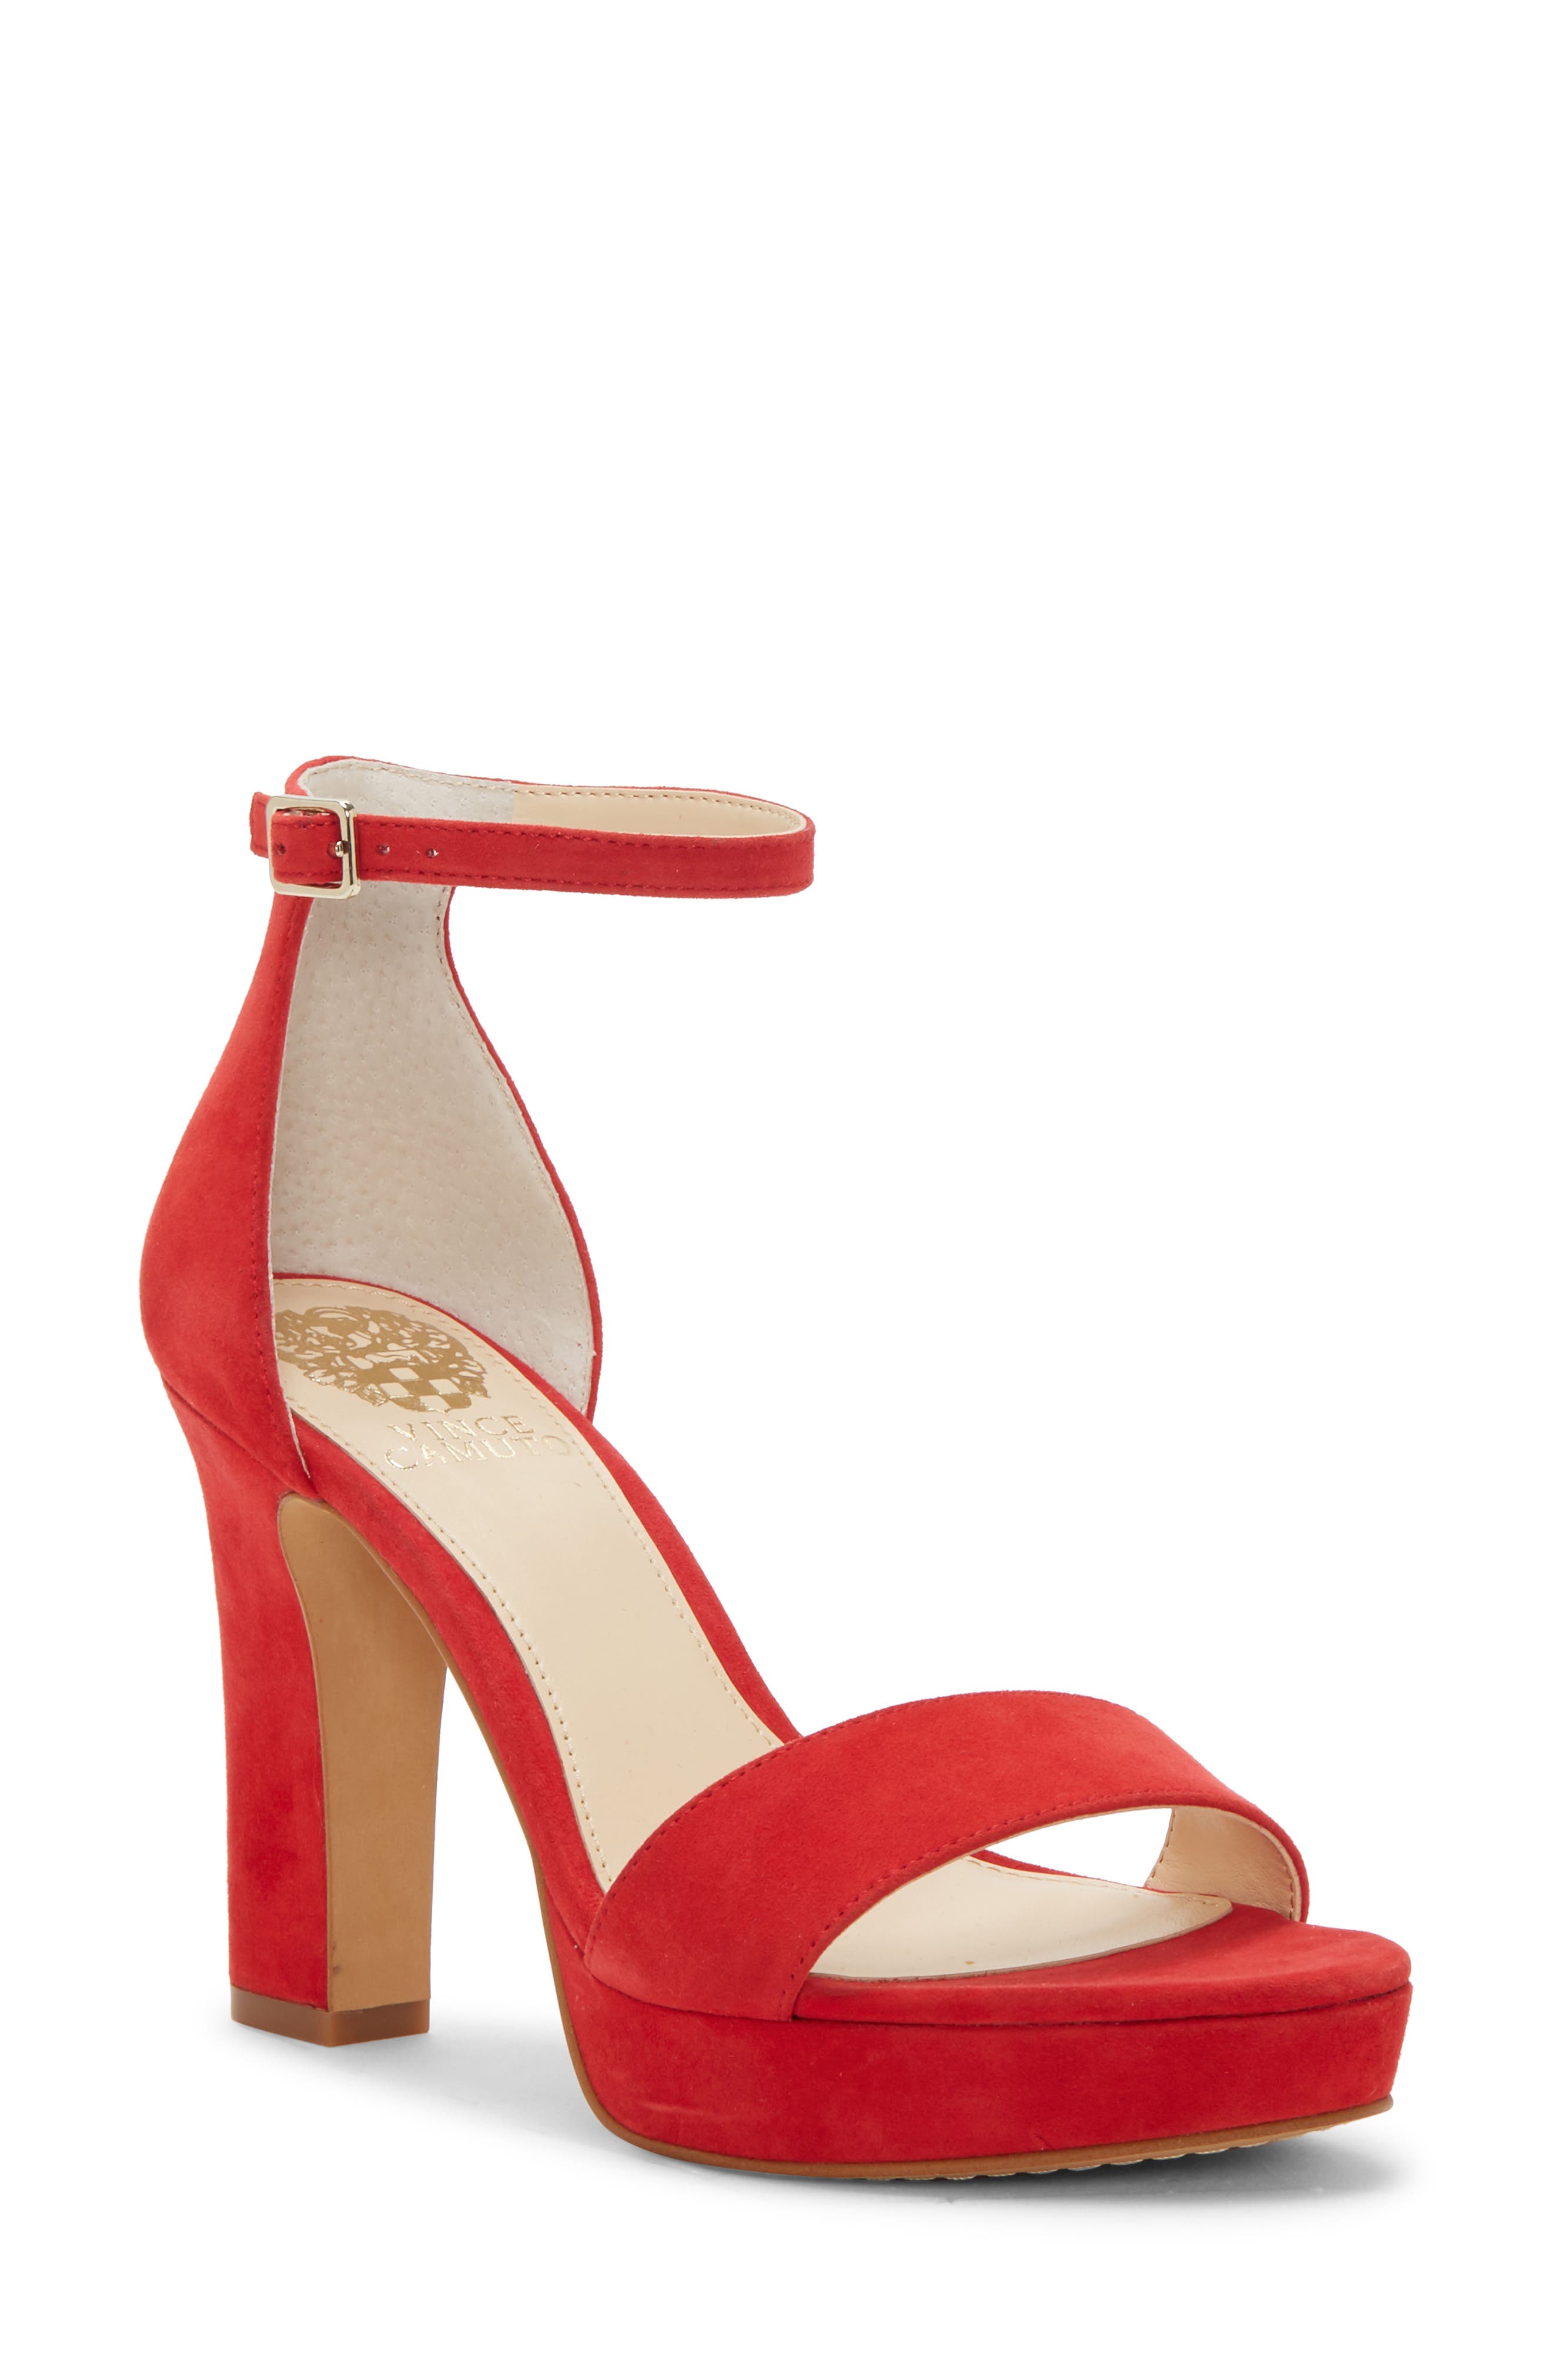 Vince Camuto Sathina Open Toe Sandal In Glamour Red Suede